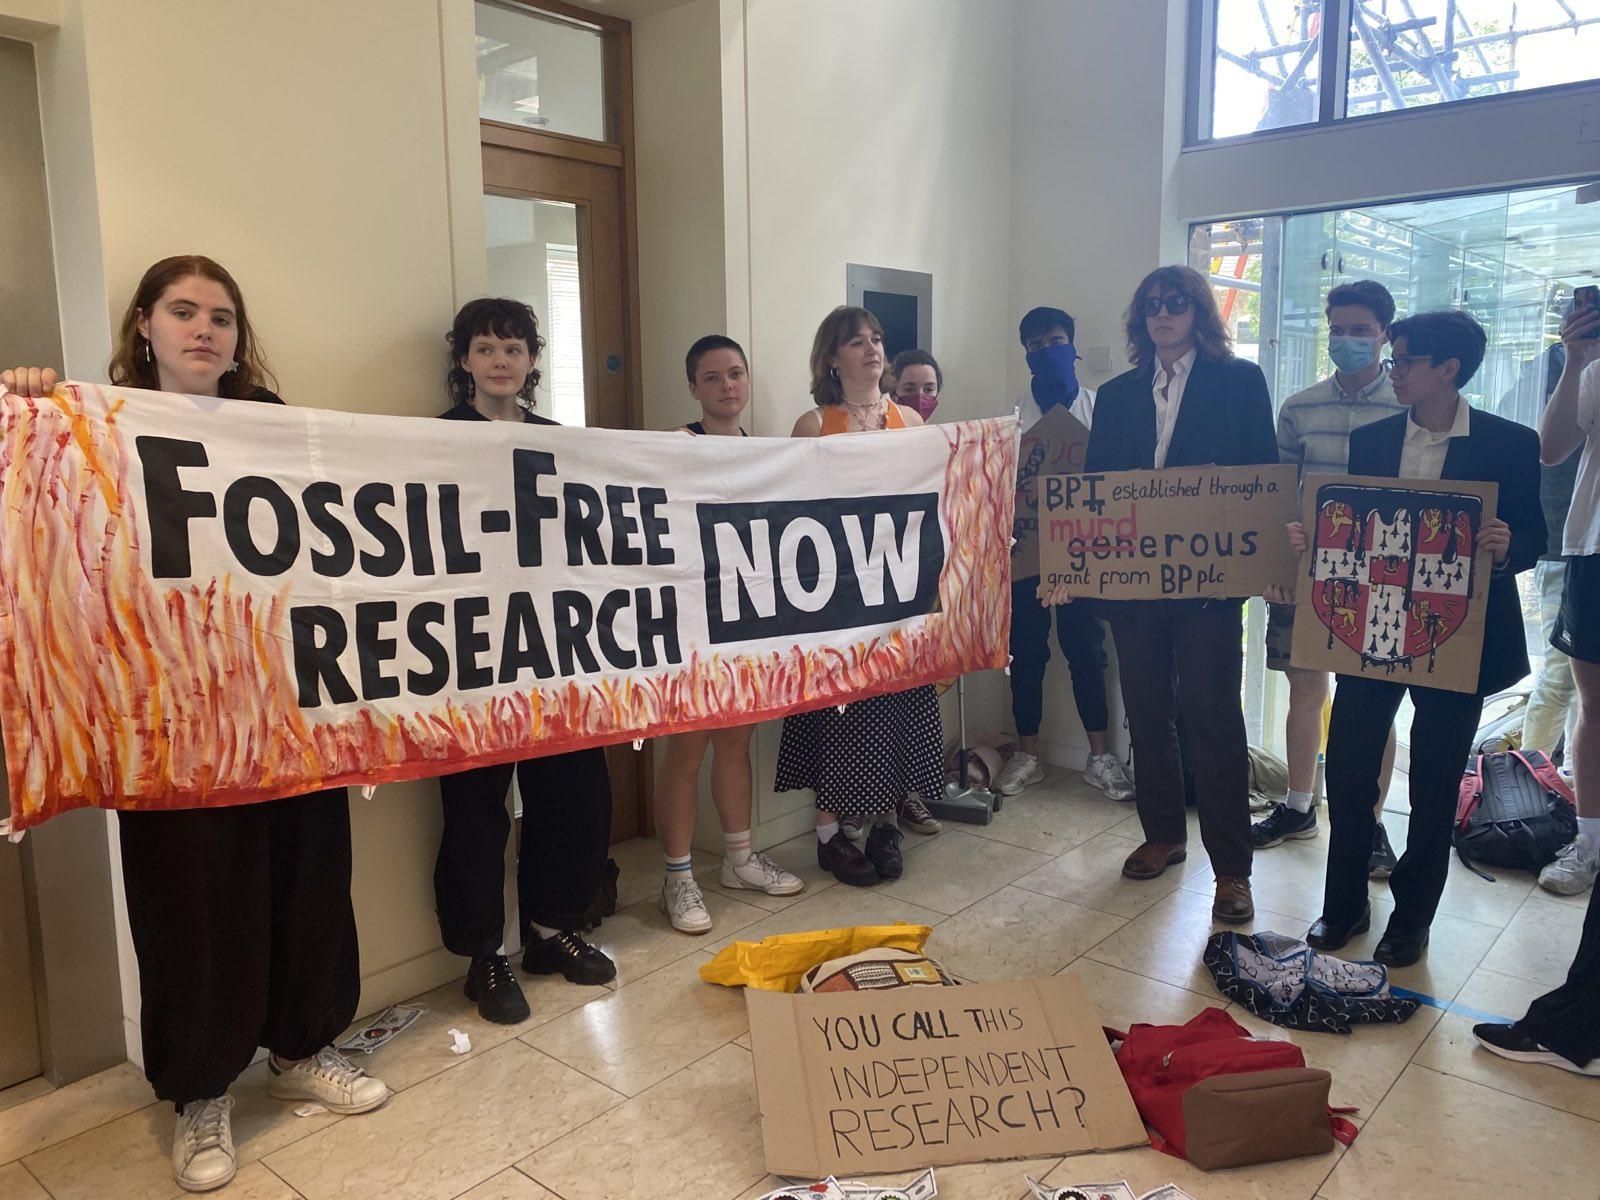 Fossil Free Research campaigners